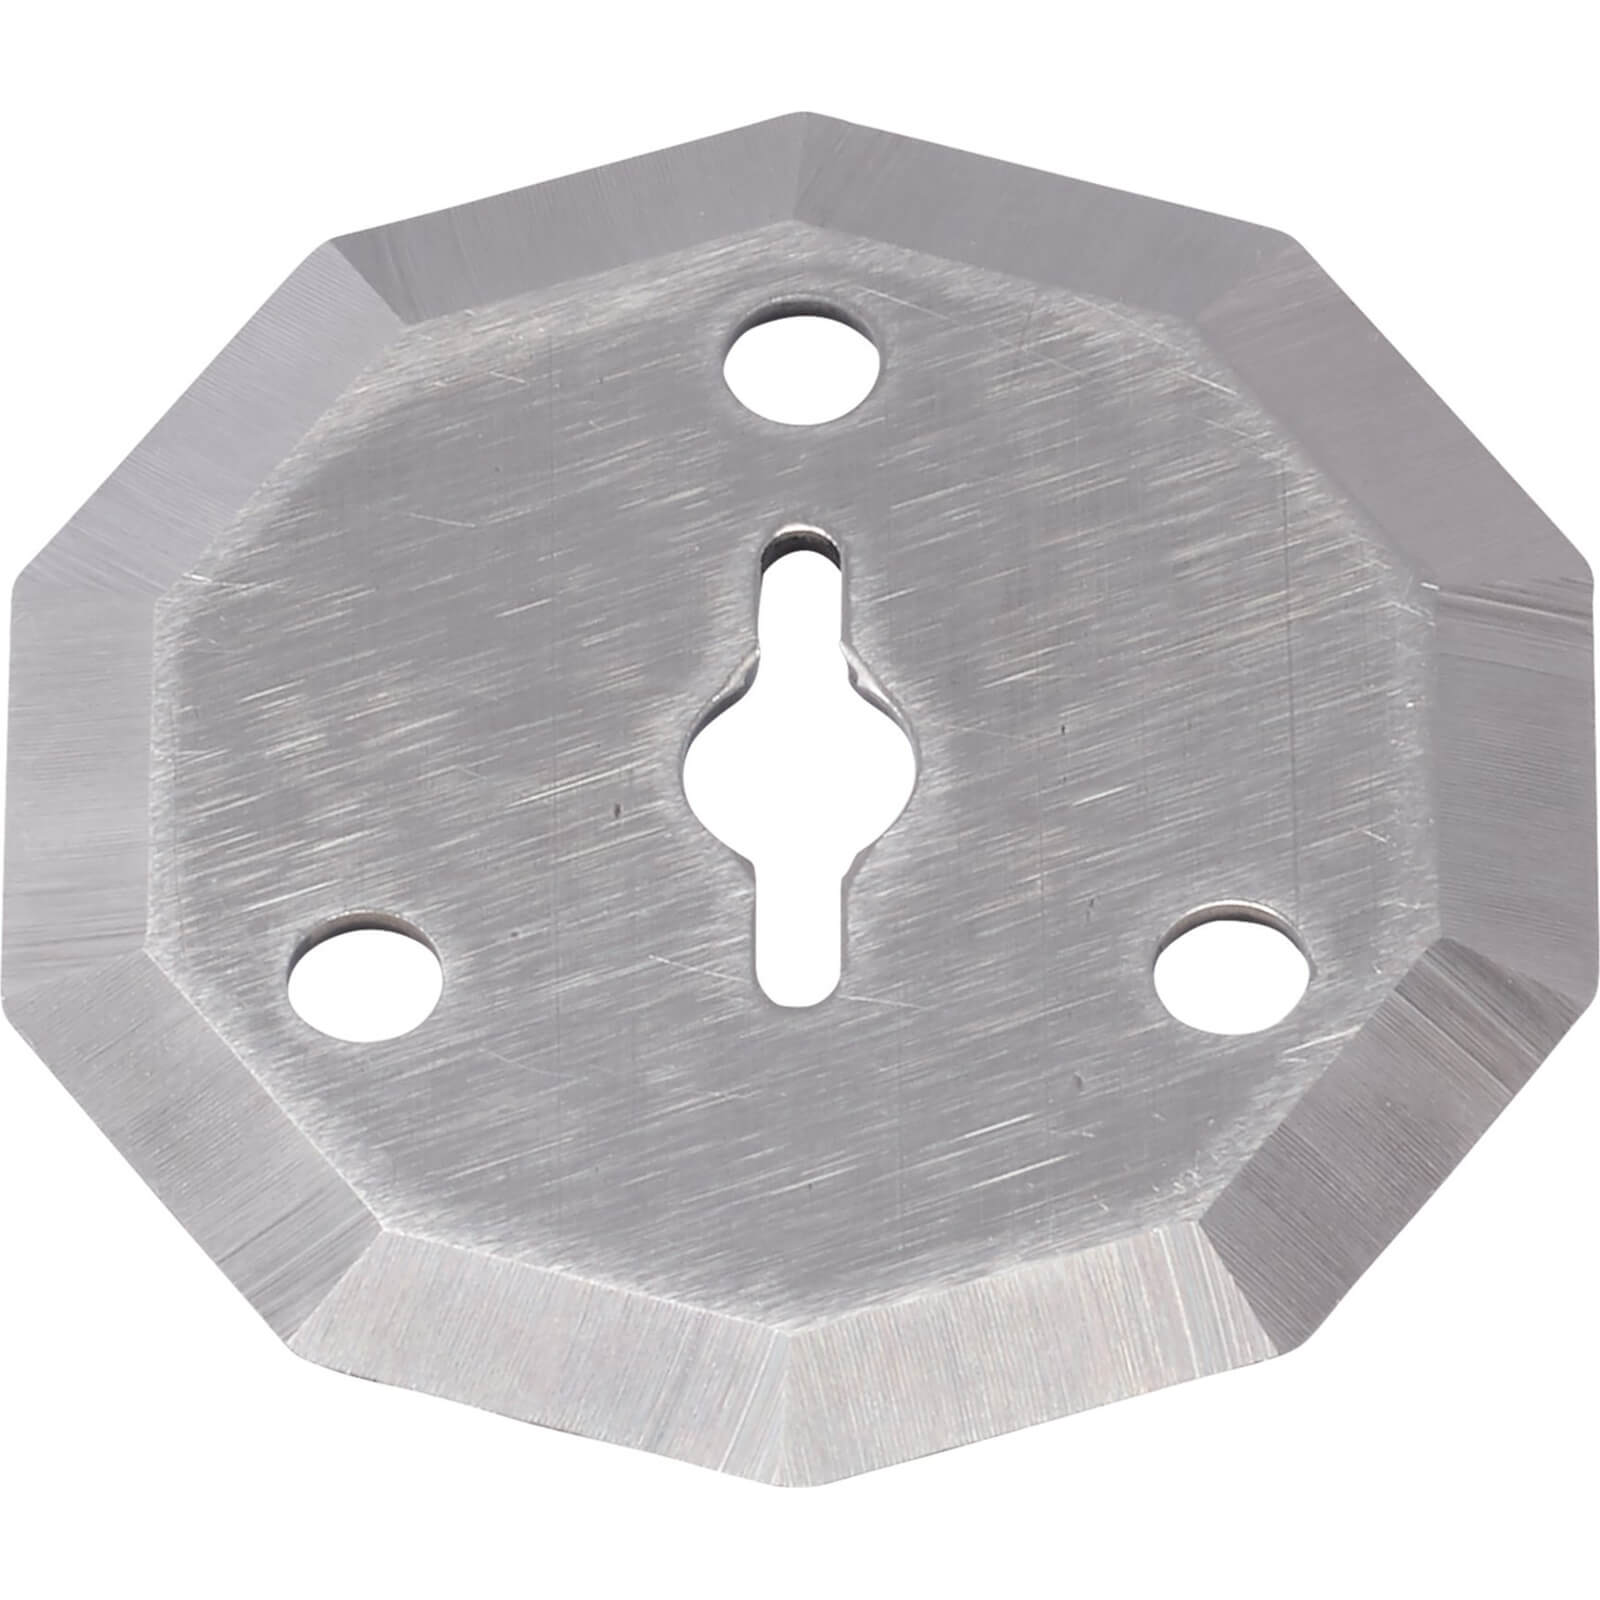 Image of Draper Replacement Blade for 19403 Screwdriver and Cutting Tool